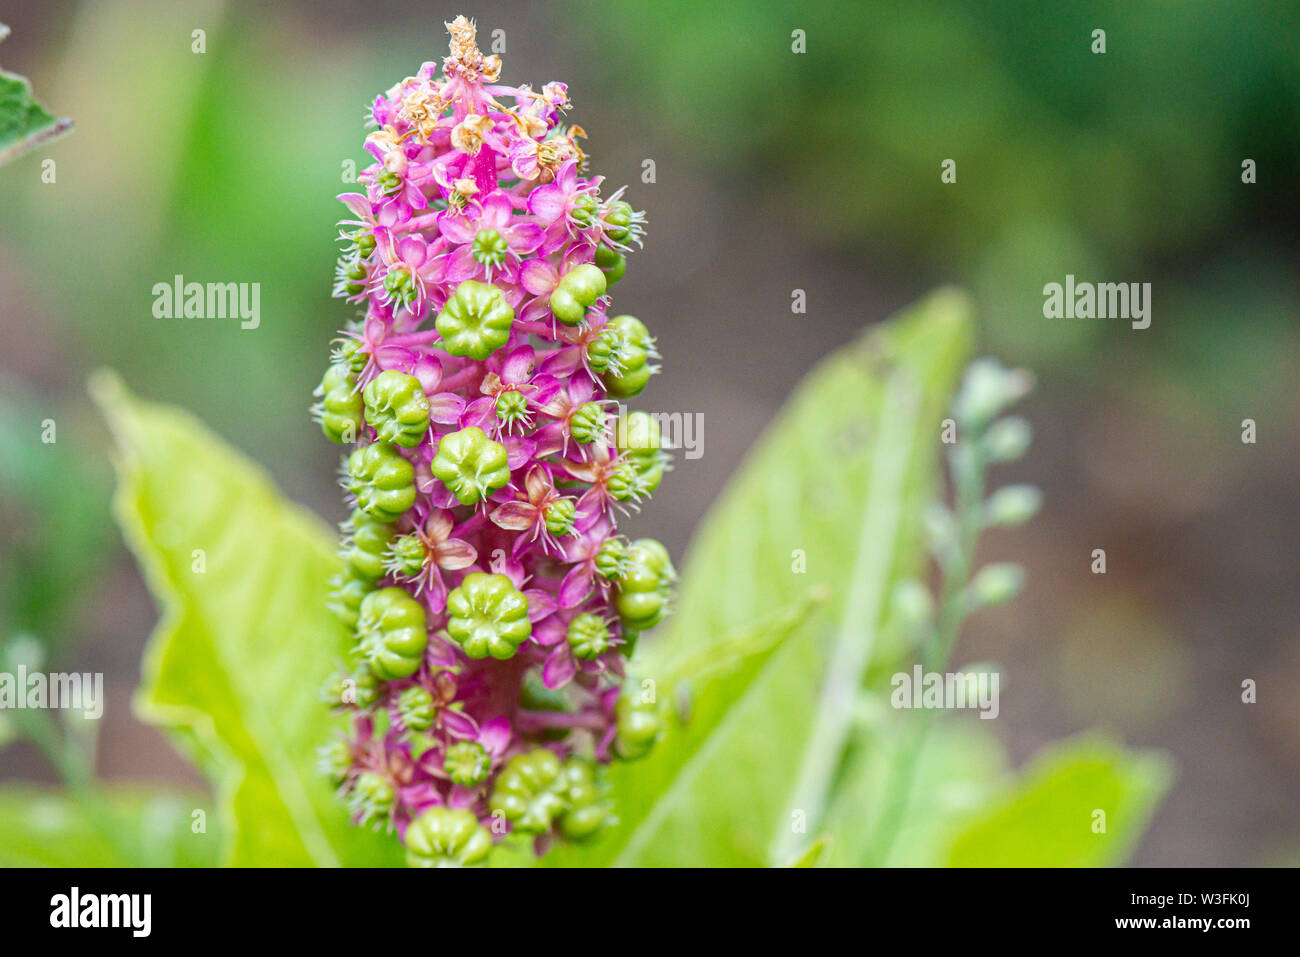 The flower spike of an American pokeweed (Phytolacca americana) Stock Photo